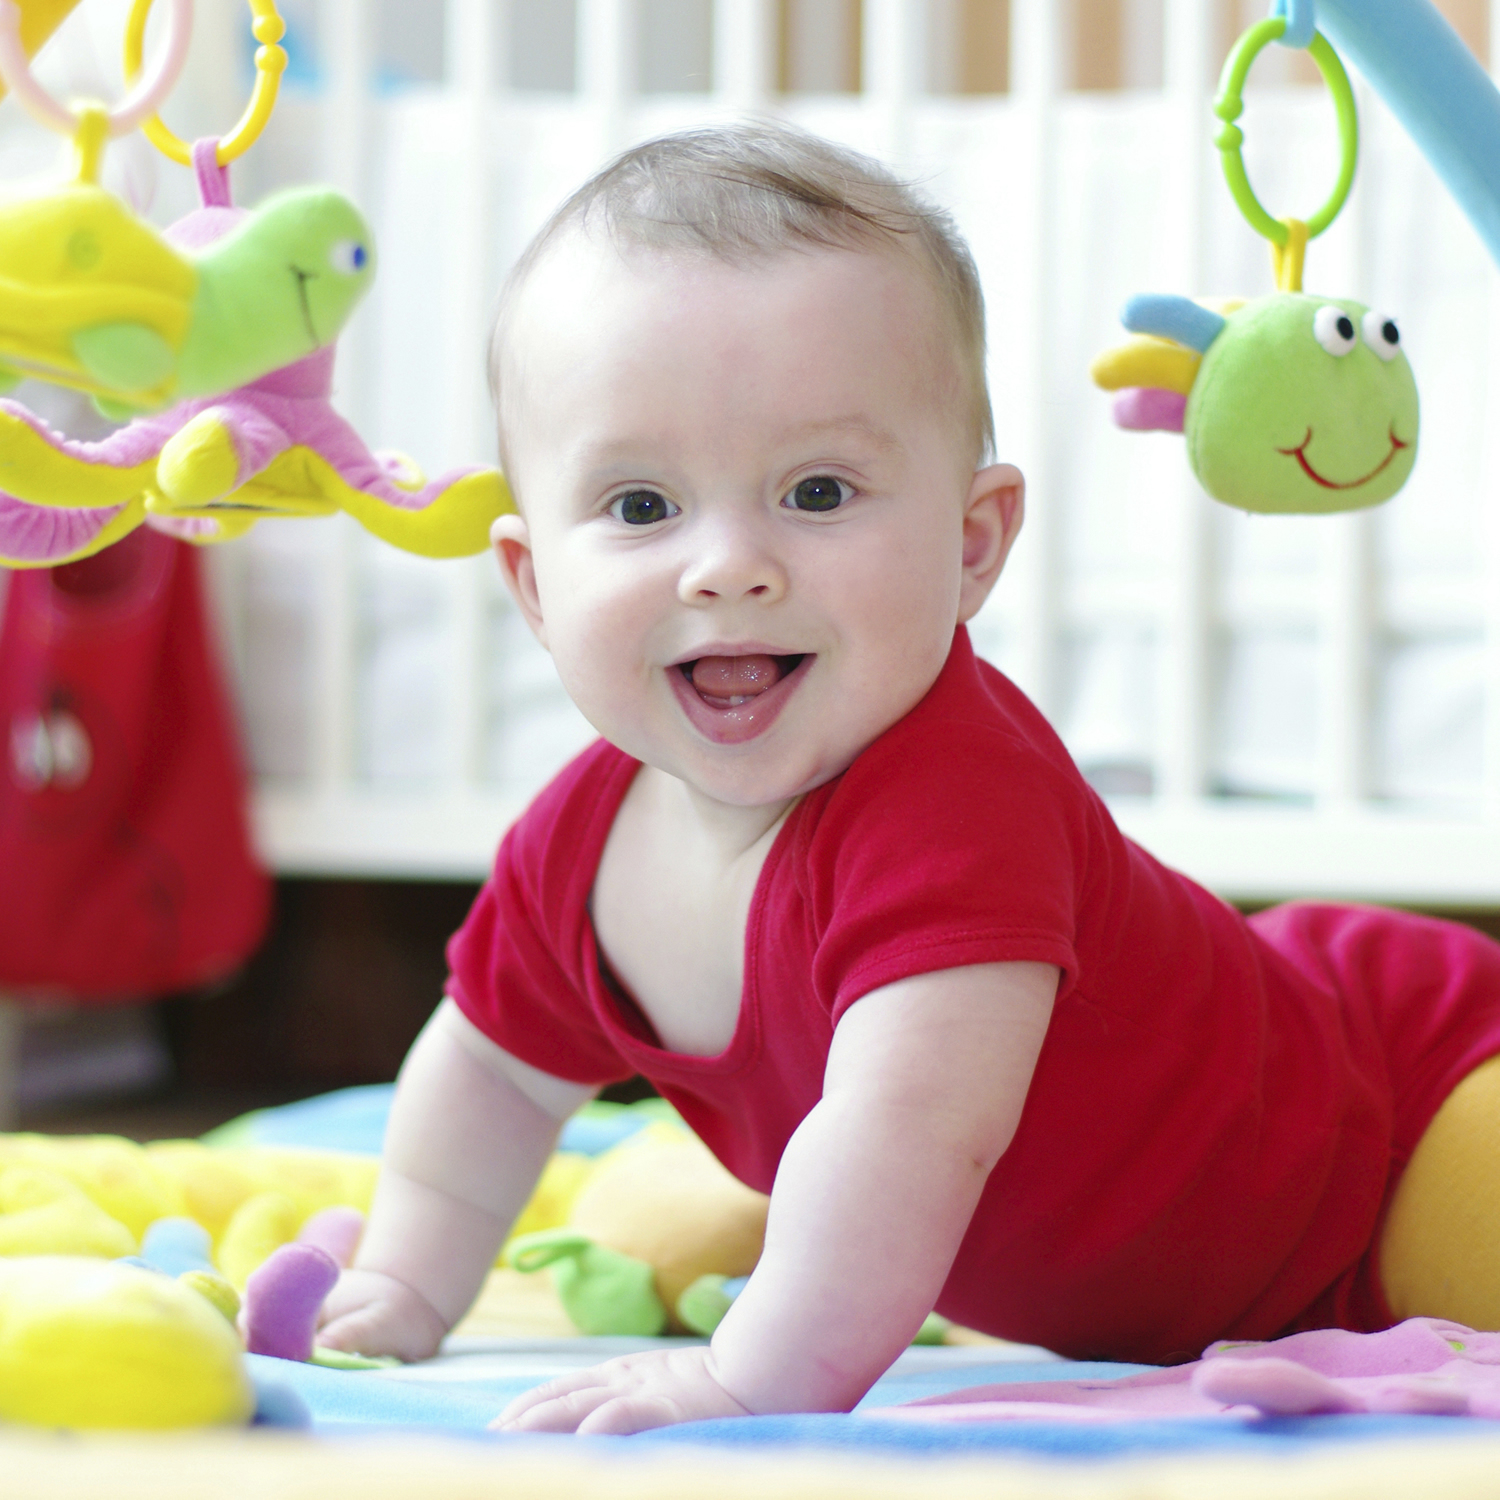 Fun, fast ways to help your baby build motor skills.